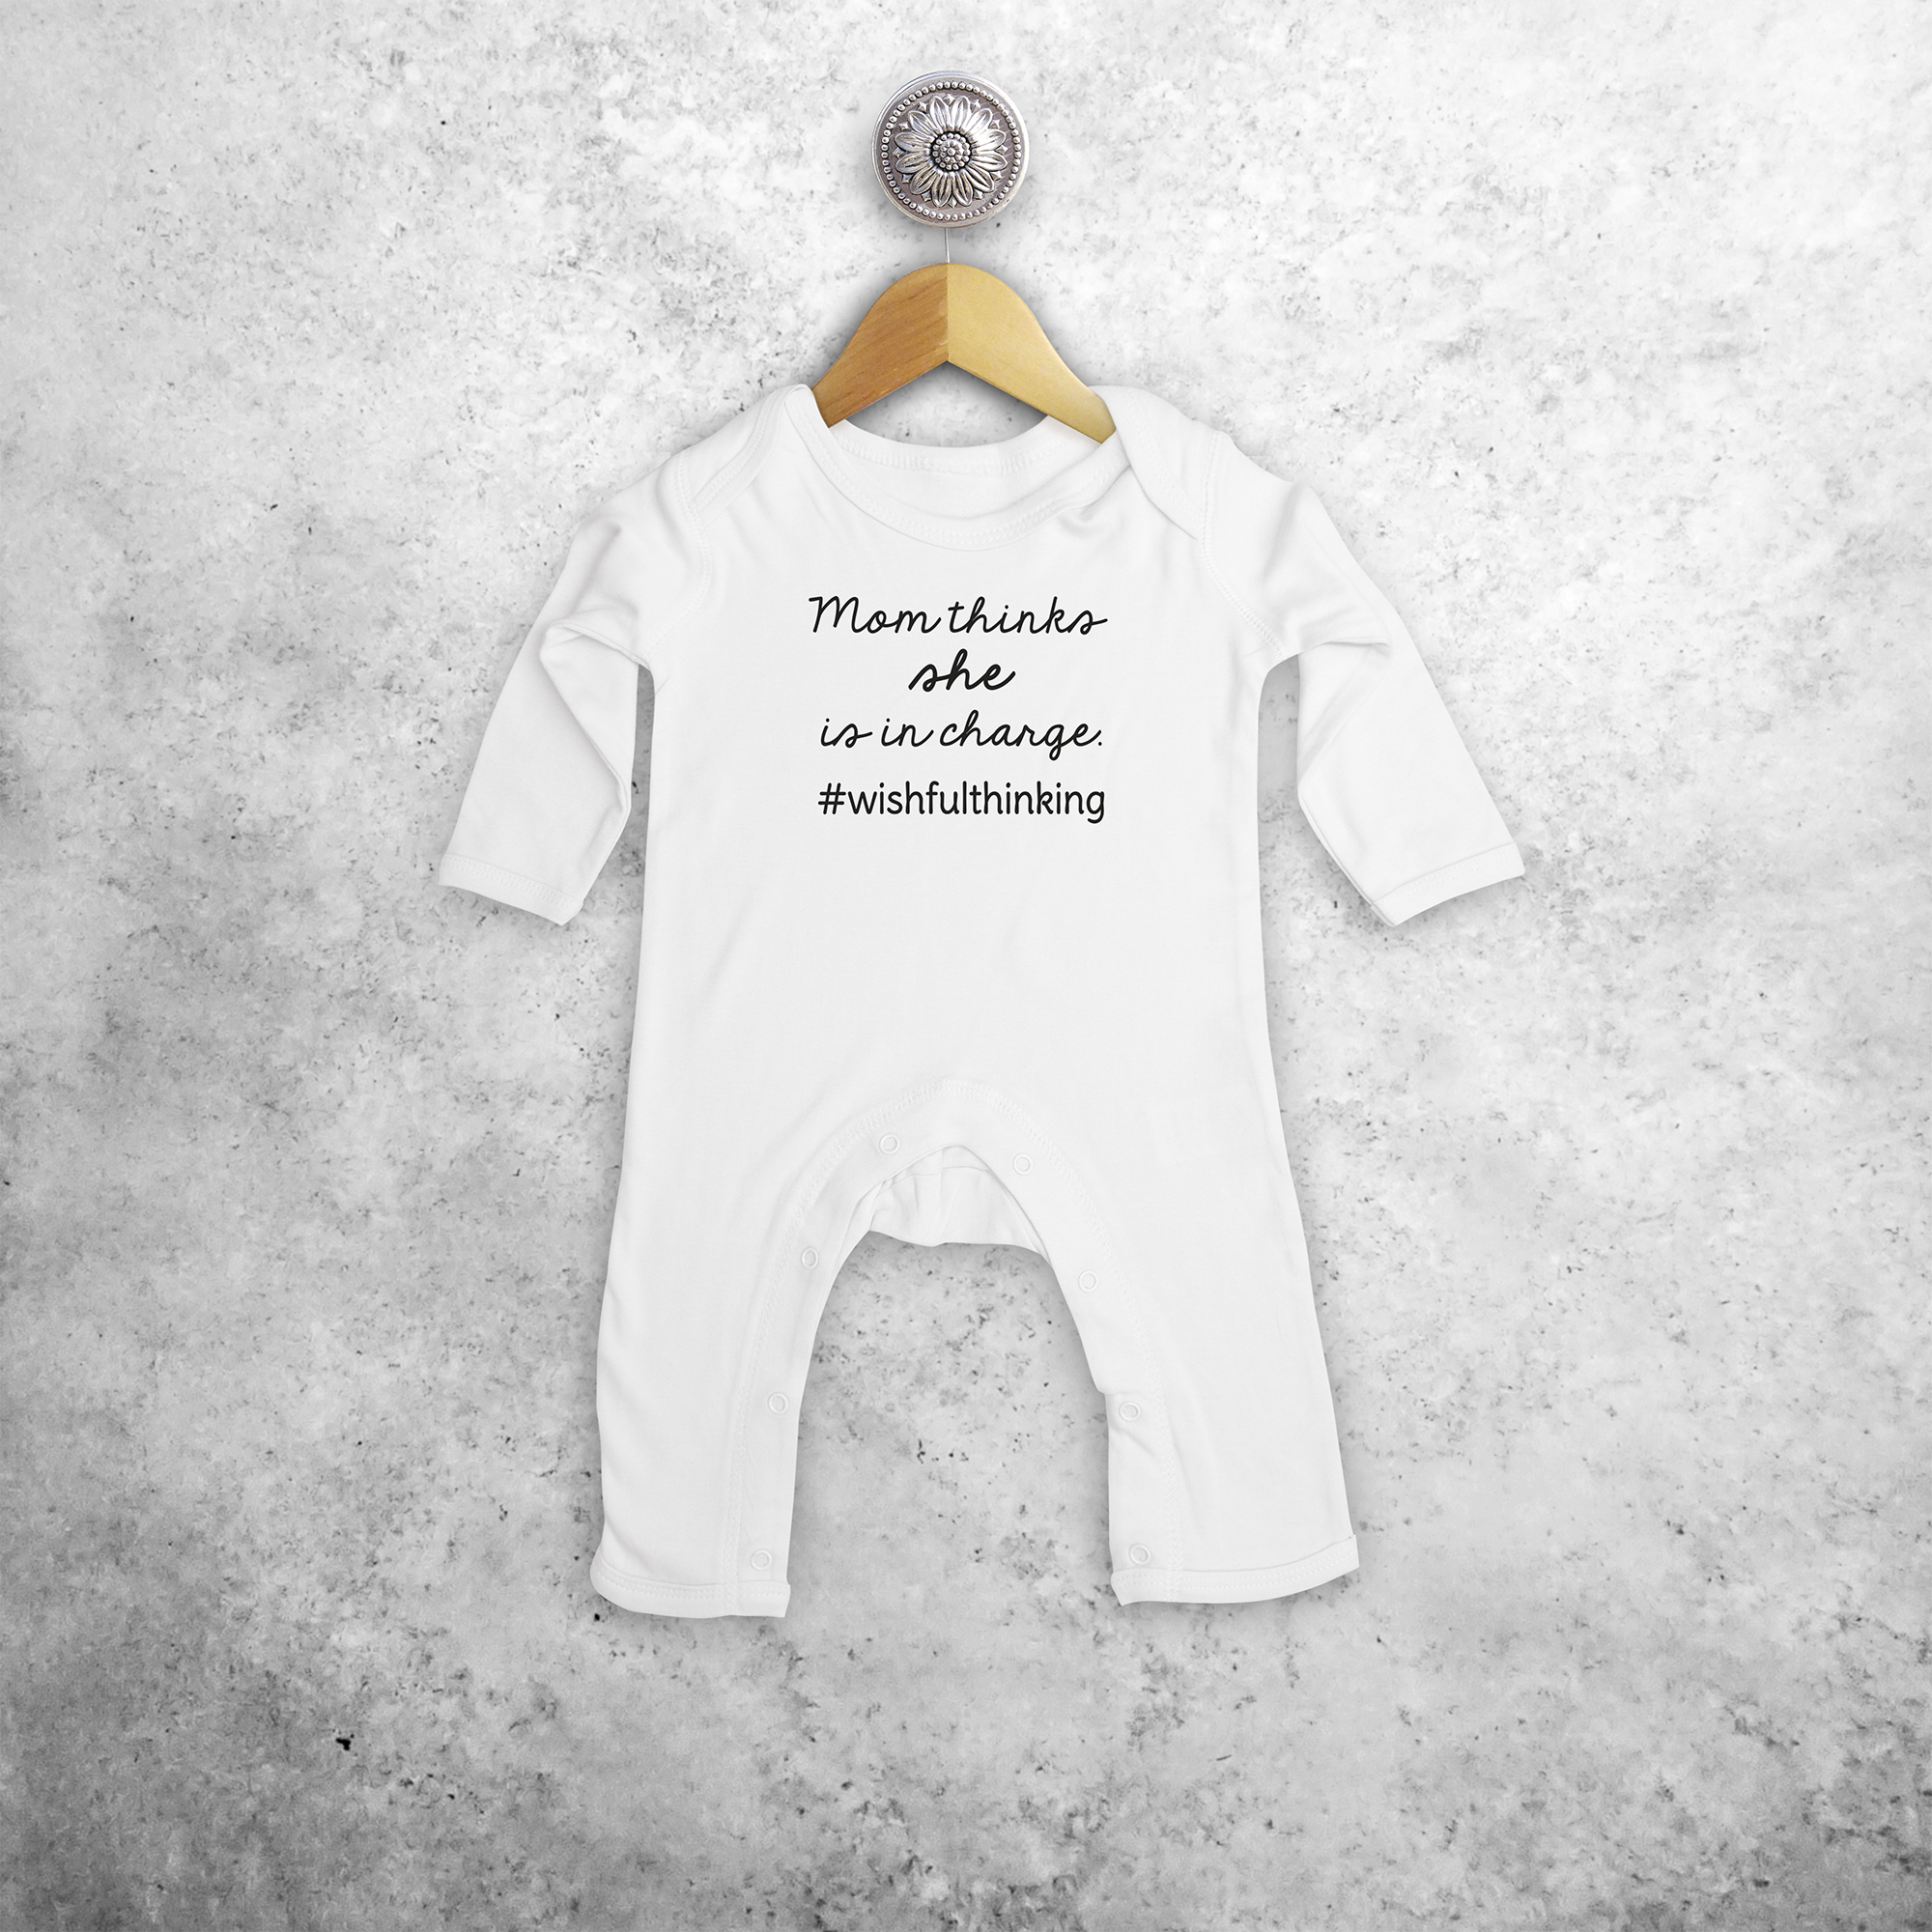 'Mom thinks she is in charge' baby romper